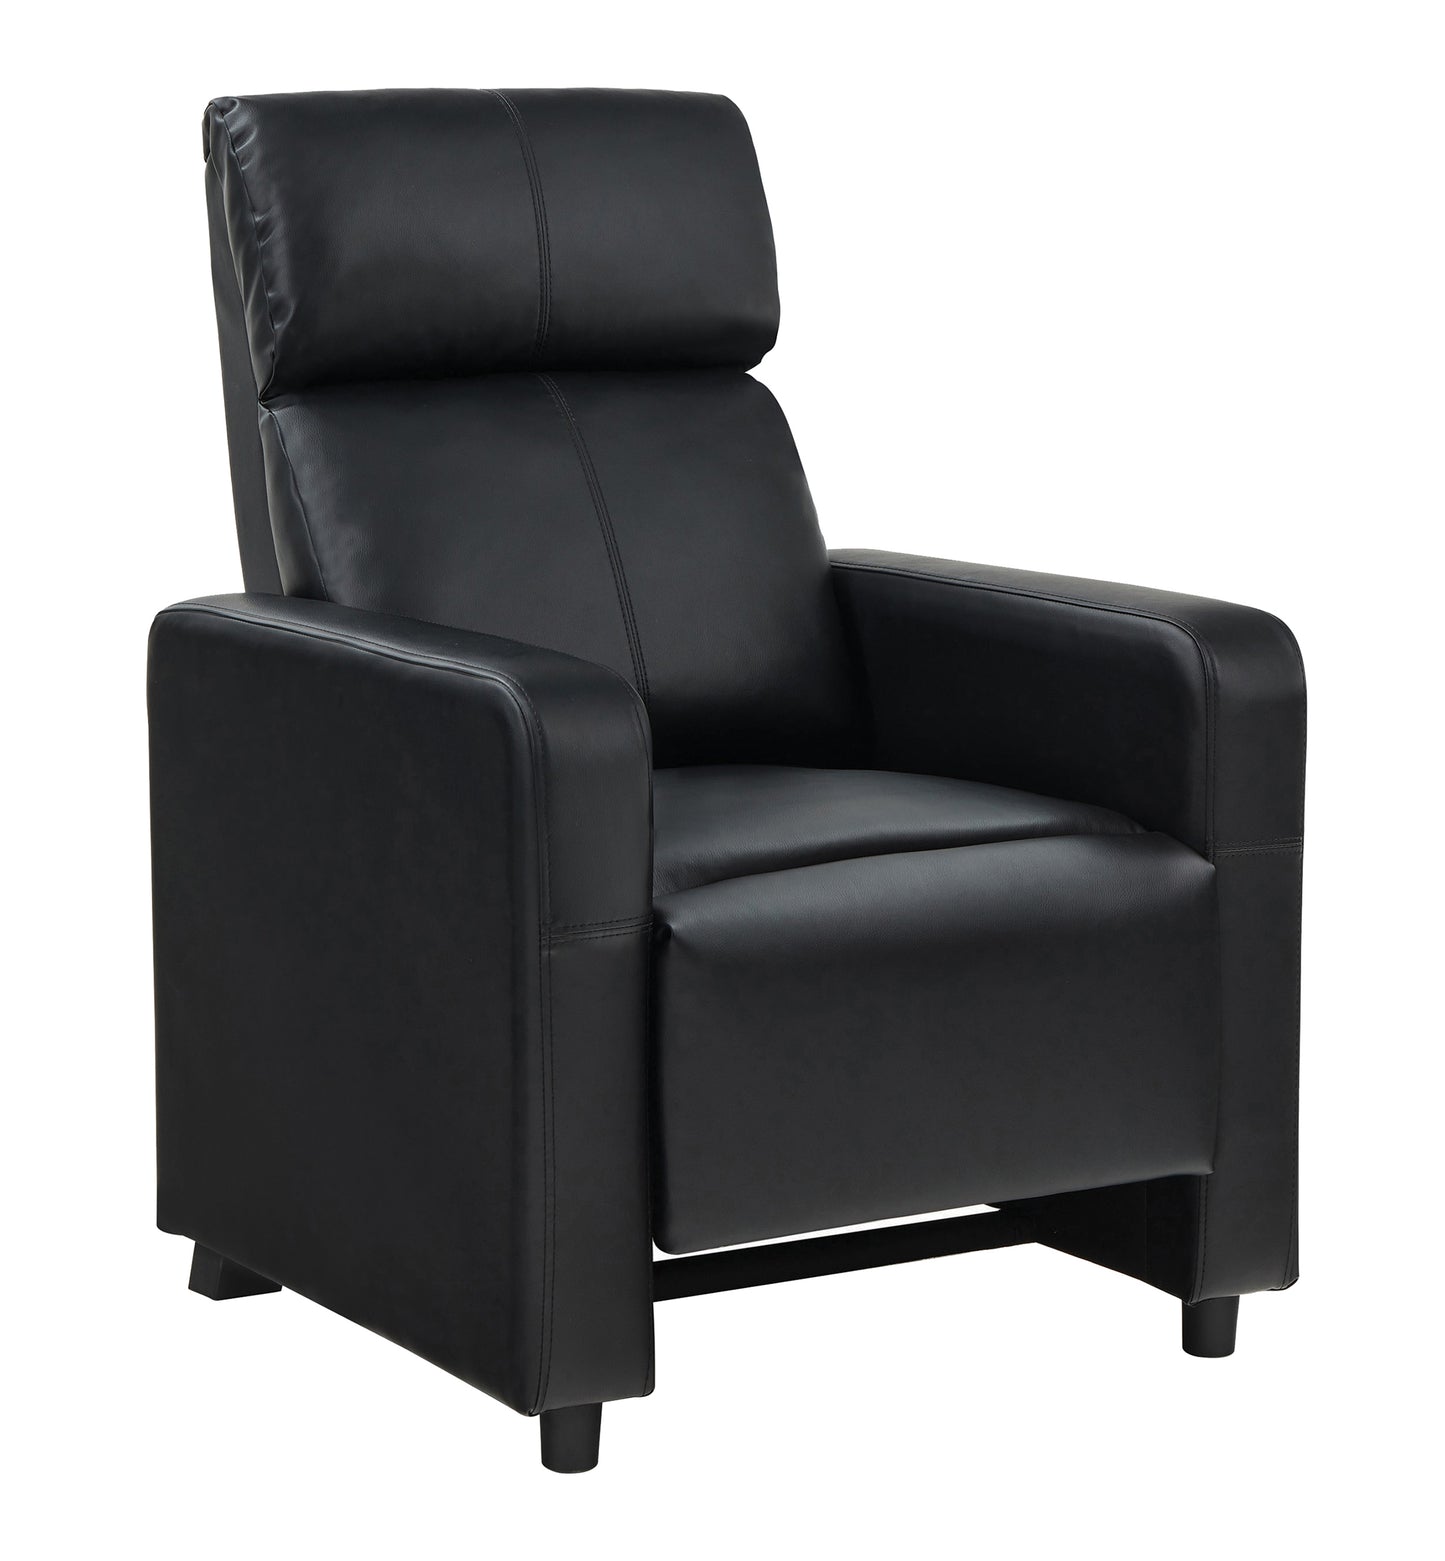 Toohey 600181 Home Theater Push Back Recliner